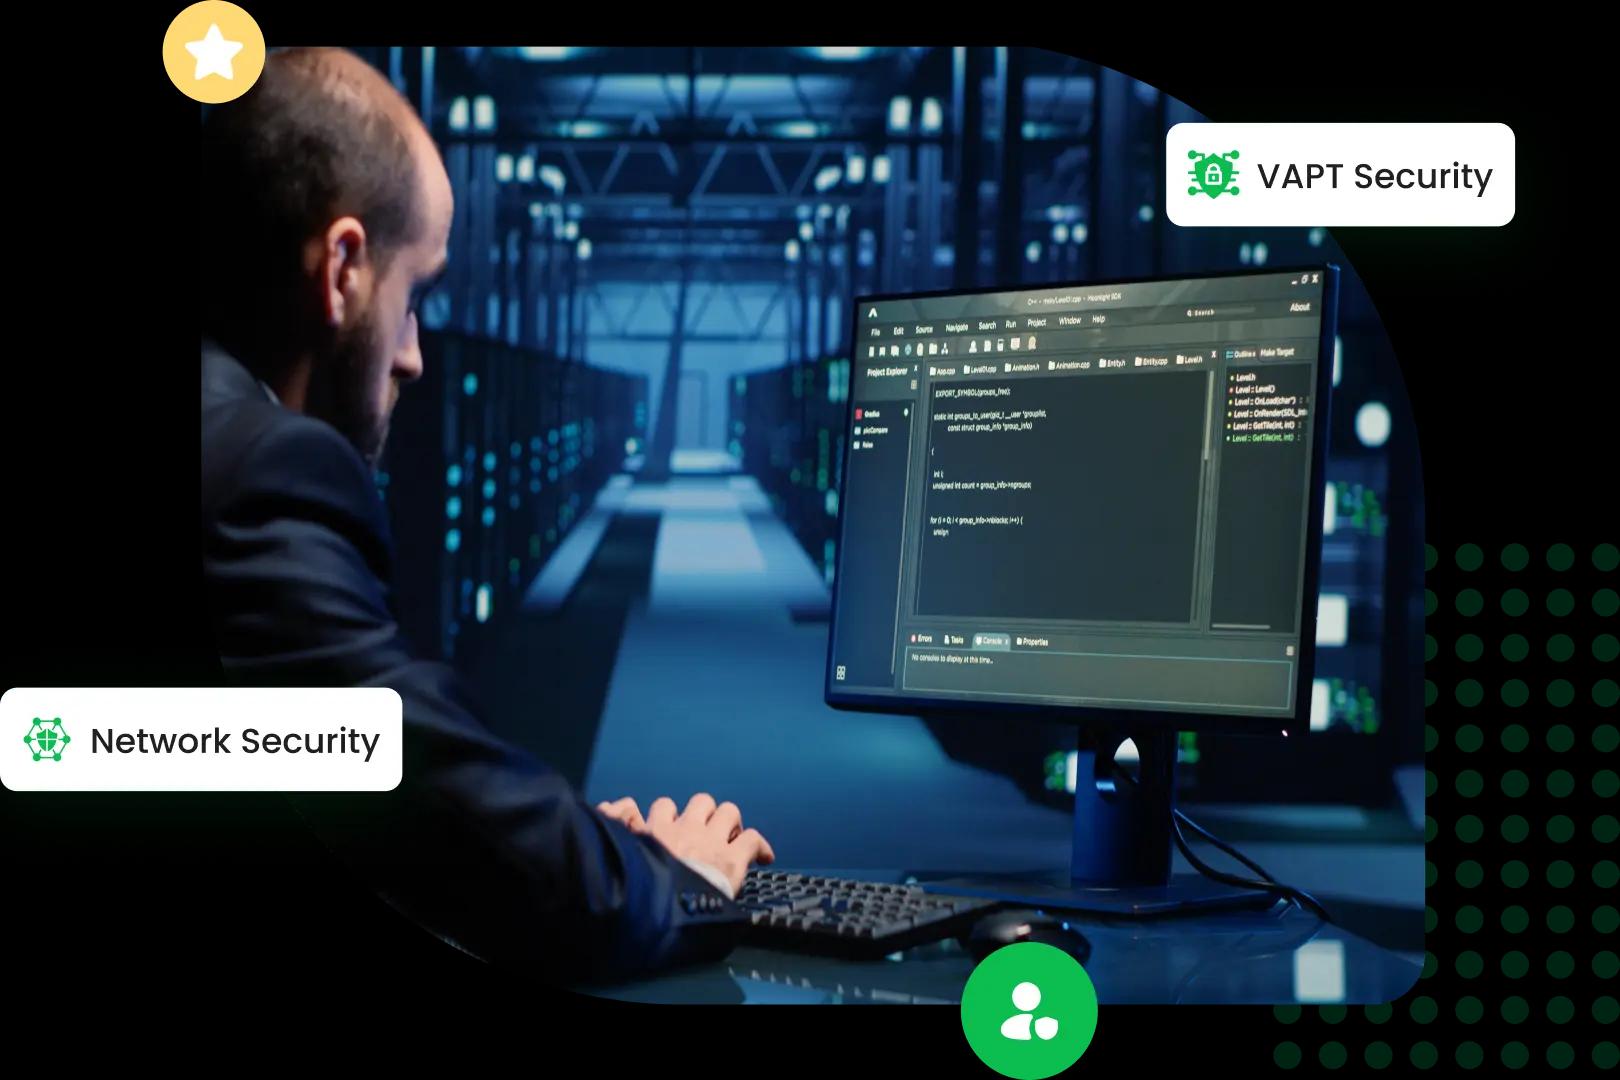 Professional in a data centre interacting with a cybersecurity interface on a monitor, symbolising Mitigata's tailored security services for business needs, including risk assessments and incident response to safeguard against cyber threats